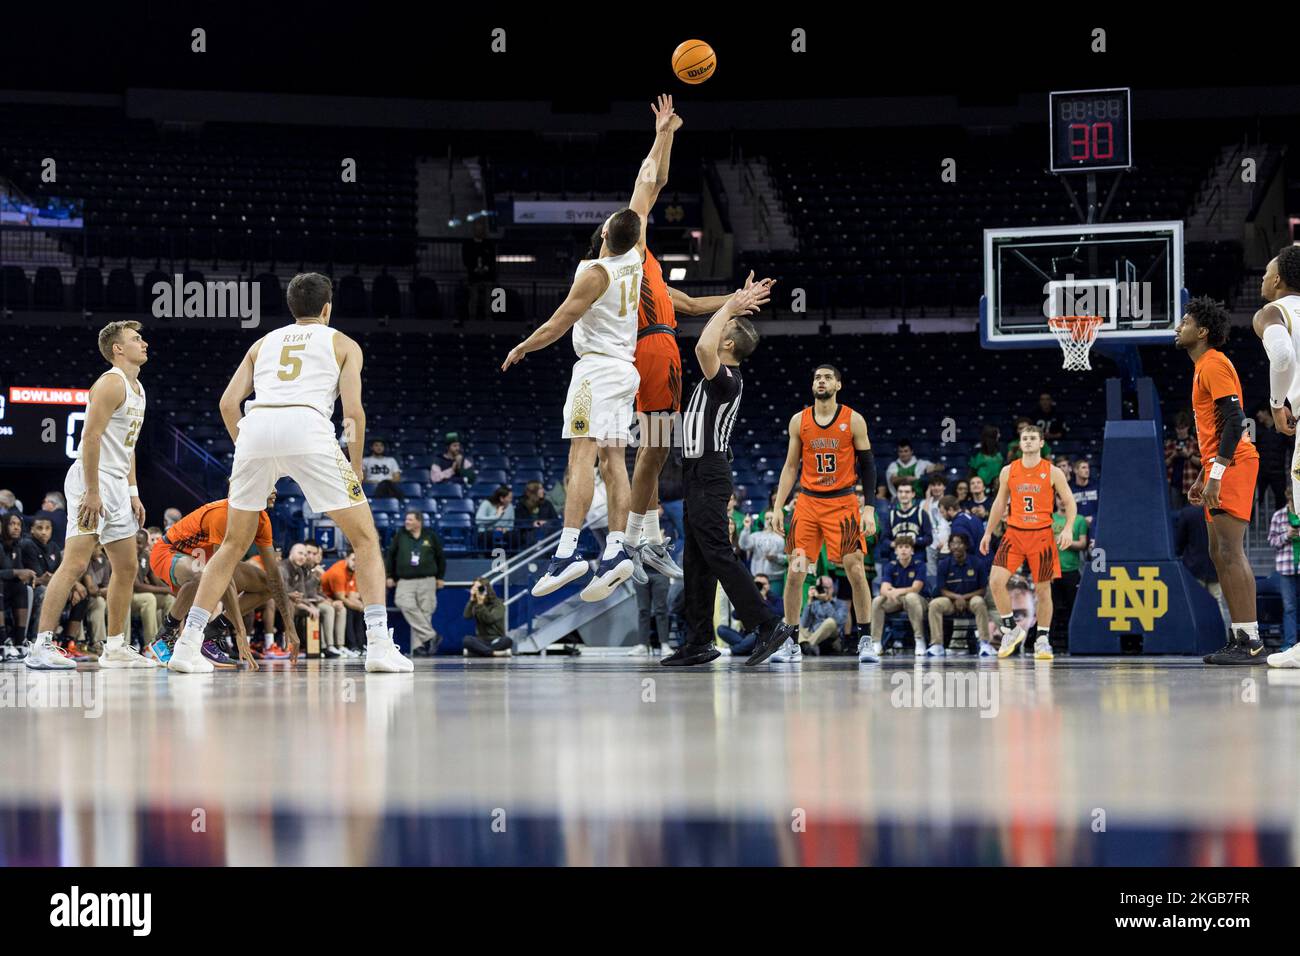 South Bend, Indiana, USA. 22nd Nov, 2022. The opening tip during NCAA basketball game action between the Bowling Green Falcons and the Notre Dame Fighting Irish at Purcell Pavilion at the Joyce Center in South Bend, Indiana. Notre Dame defeated Bowling Green 82-66. John Mersits/CSM/Alamy Live News Stock Photo